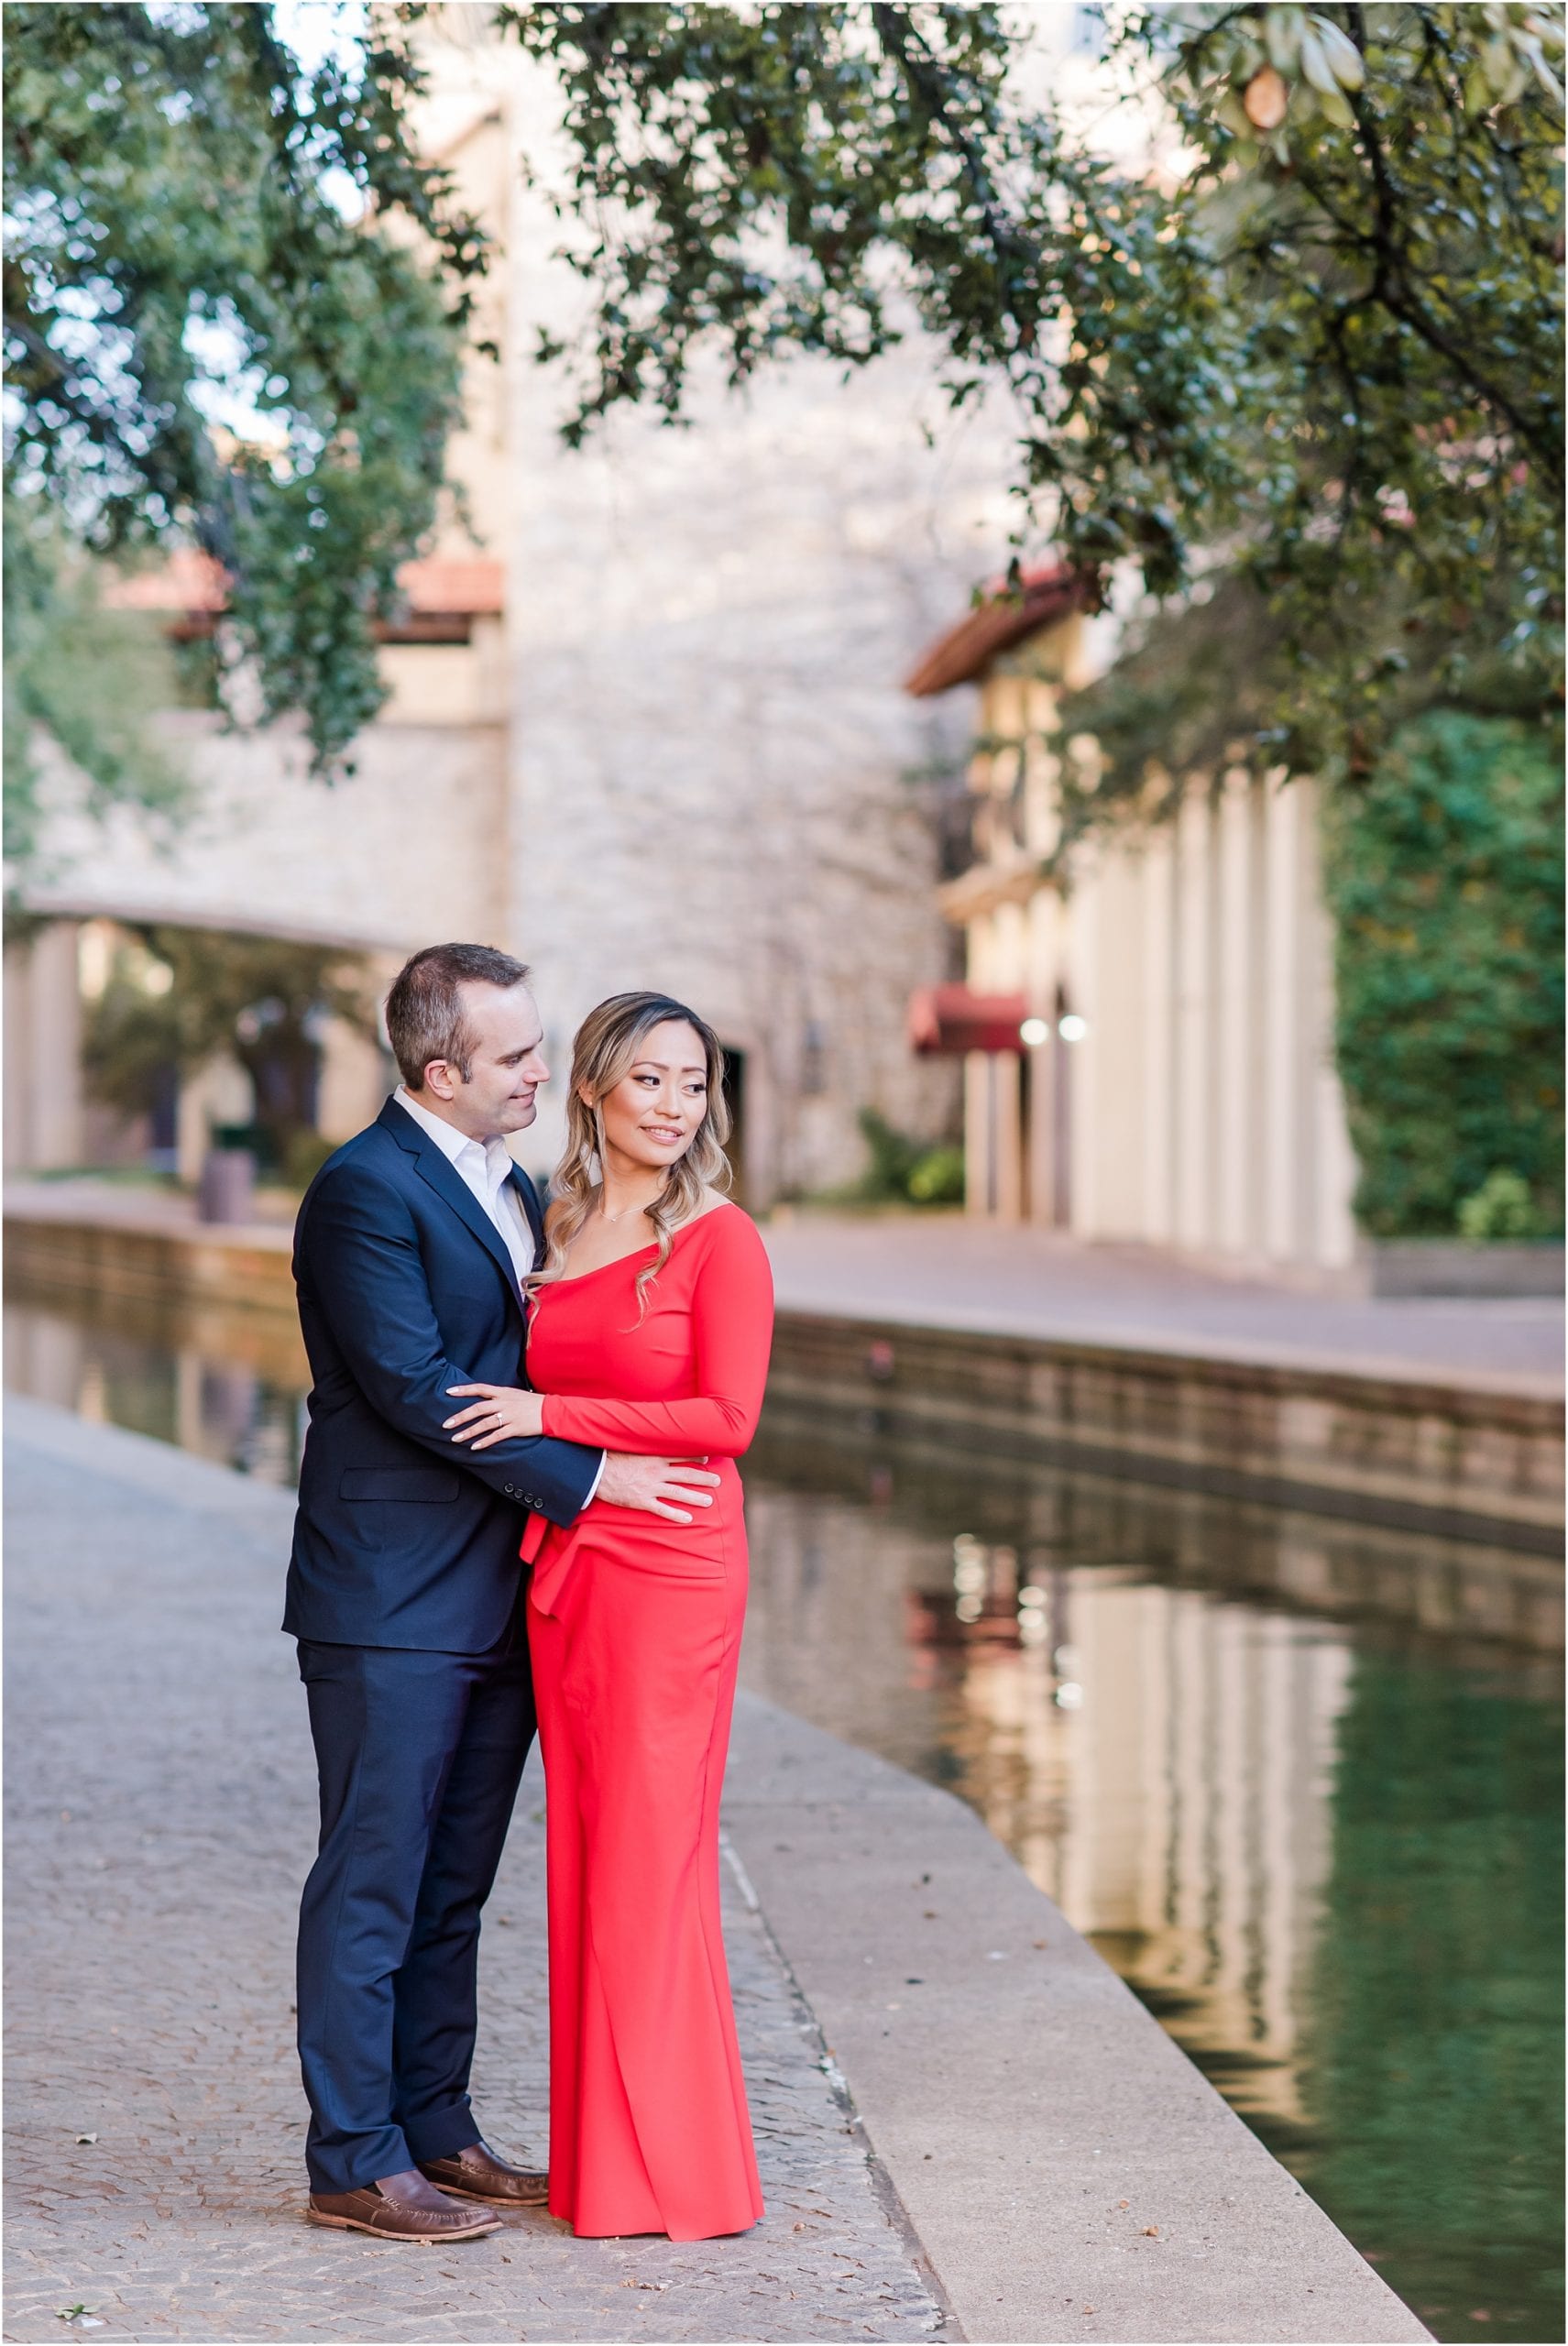 MaggShots Photography, DFW engagement Photographer, Las Colinas Canals engagement Photographer, Las Colinas Canals, Las Colinas engagements, Las Colinas Photographer, Dallas engagement Photographer,